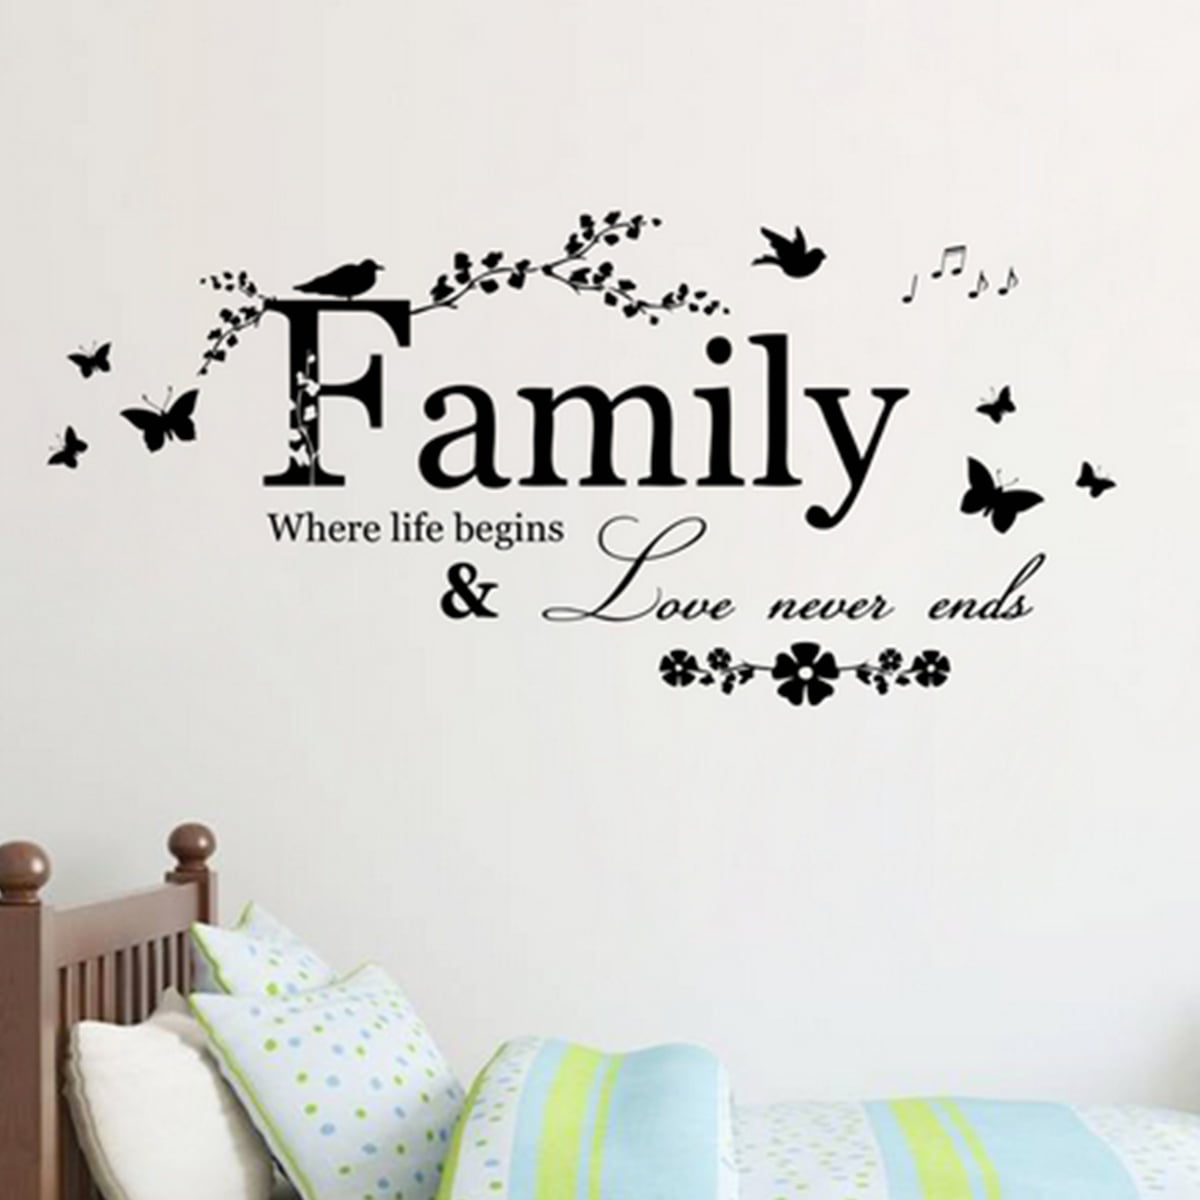 Vinyl Wall Decal Words Quote Art Sticker Mural Home Lettering Decor Removable 